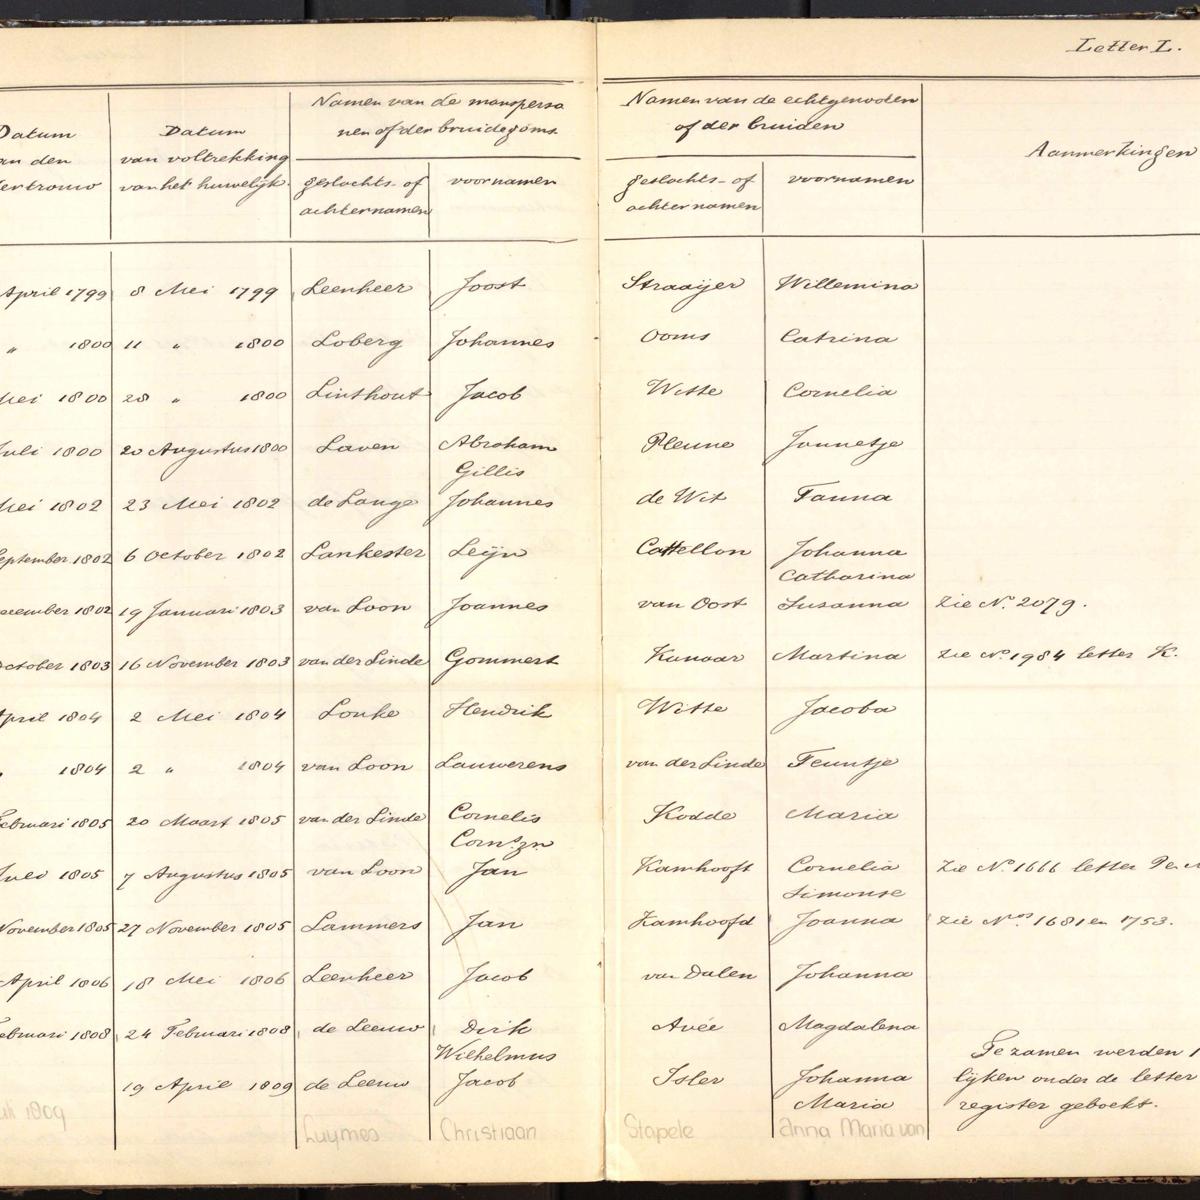 Alphabetical registry of marriages, Tholen, 1704-1810, sheet 86